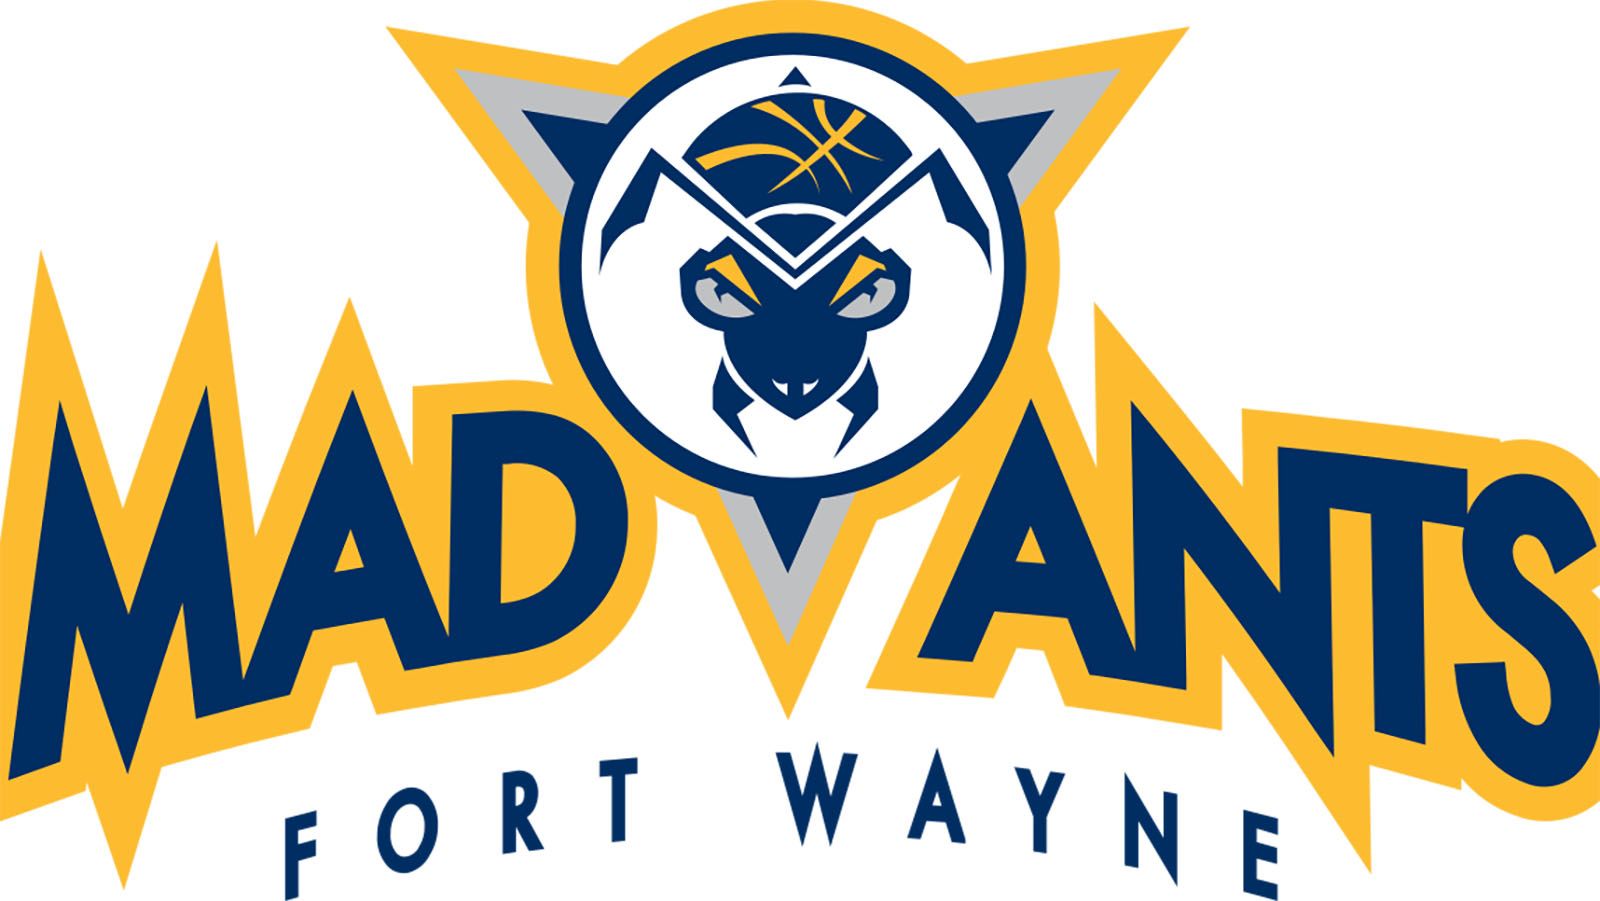 The Fort Wayne Mad Ants will be moving to Noblesville.